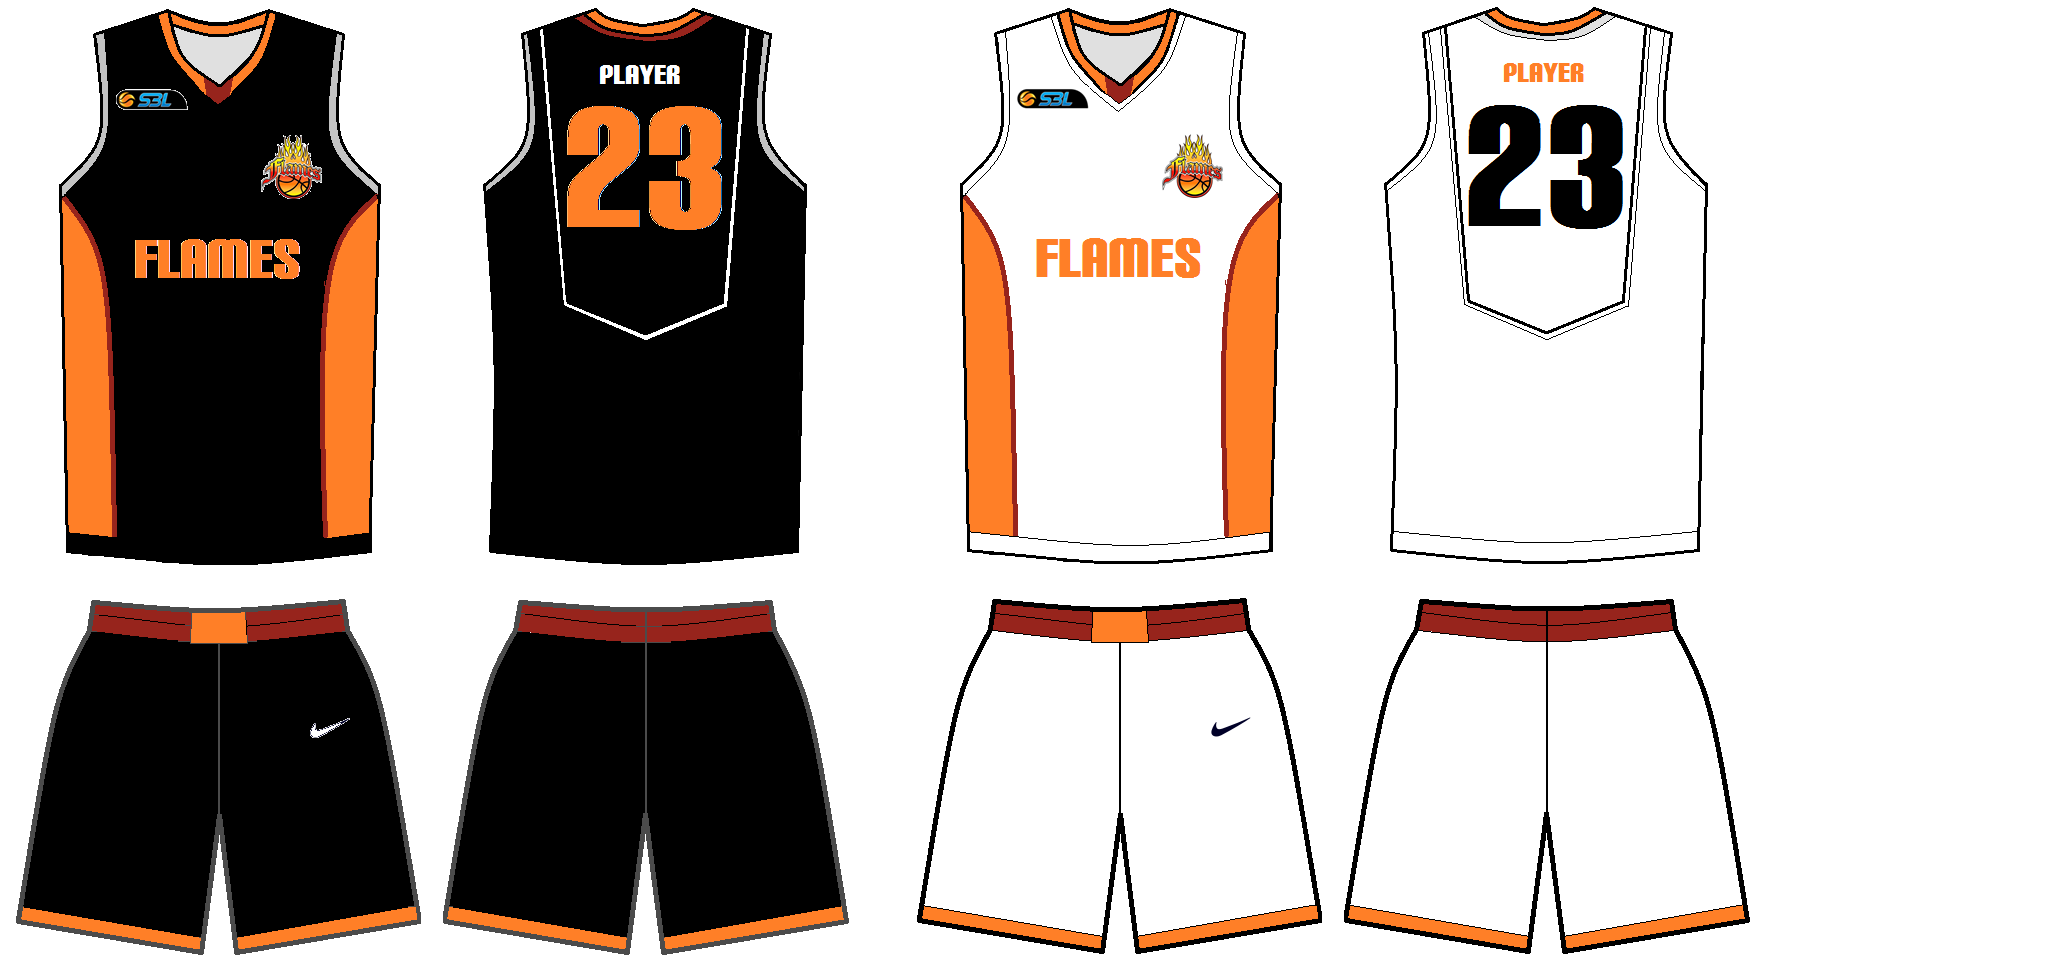 13 Basketball Jersey Template For PSD 